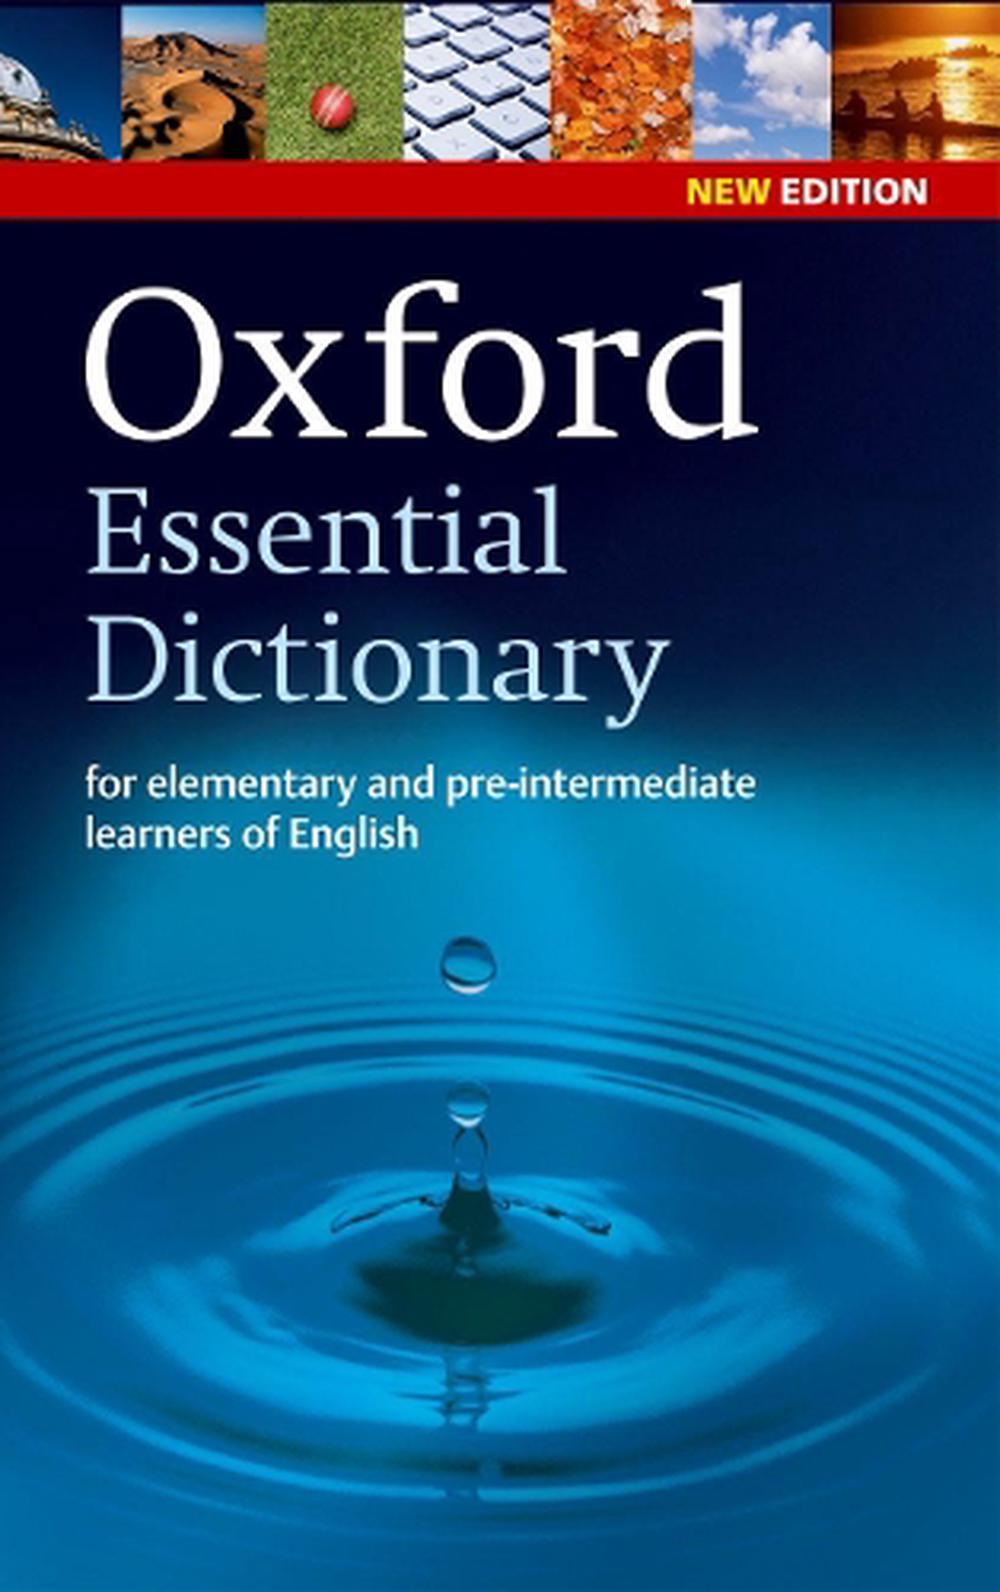 presentation meaning in oxford dictionary